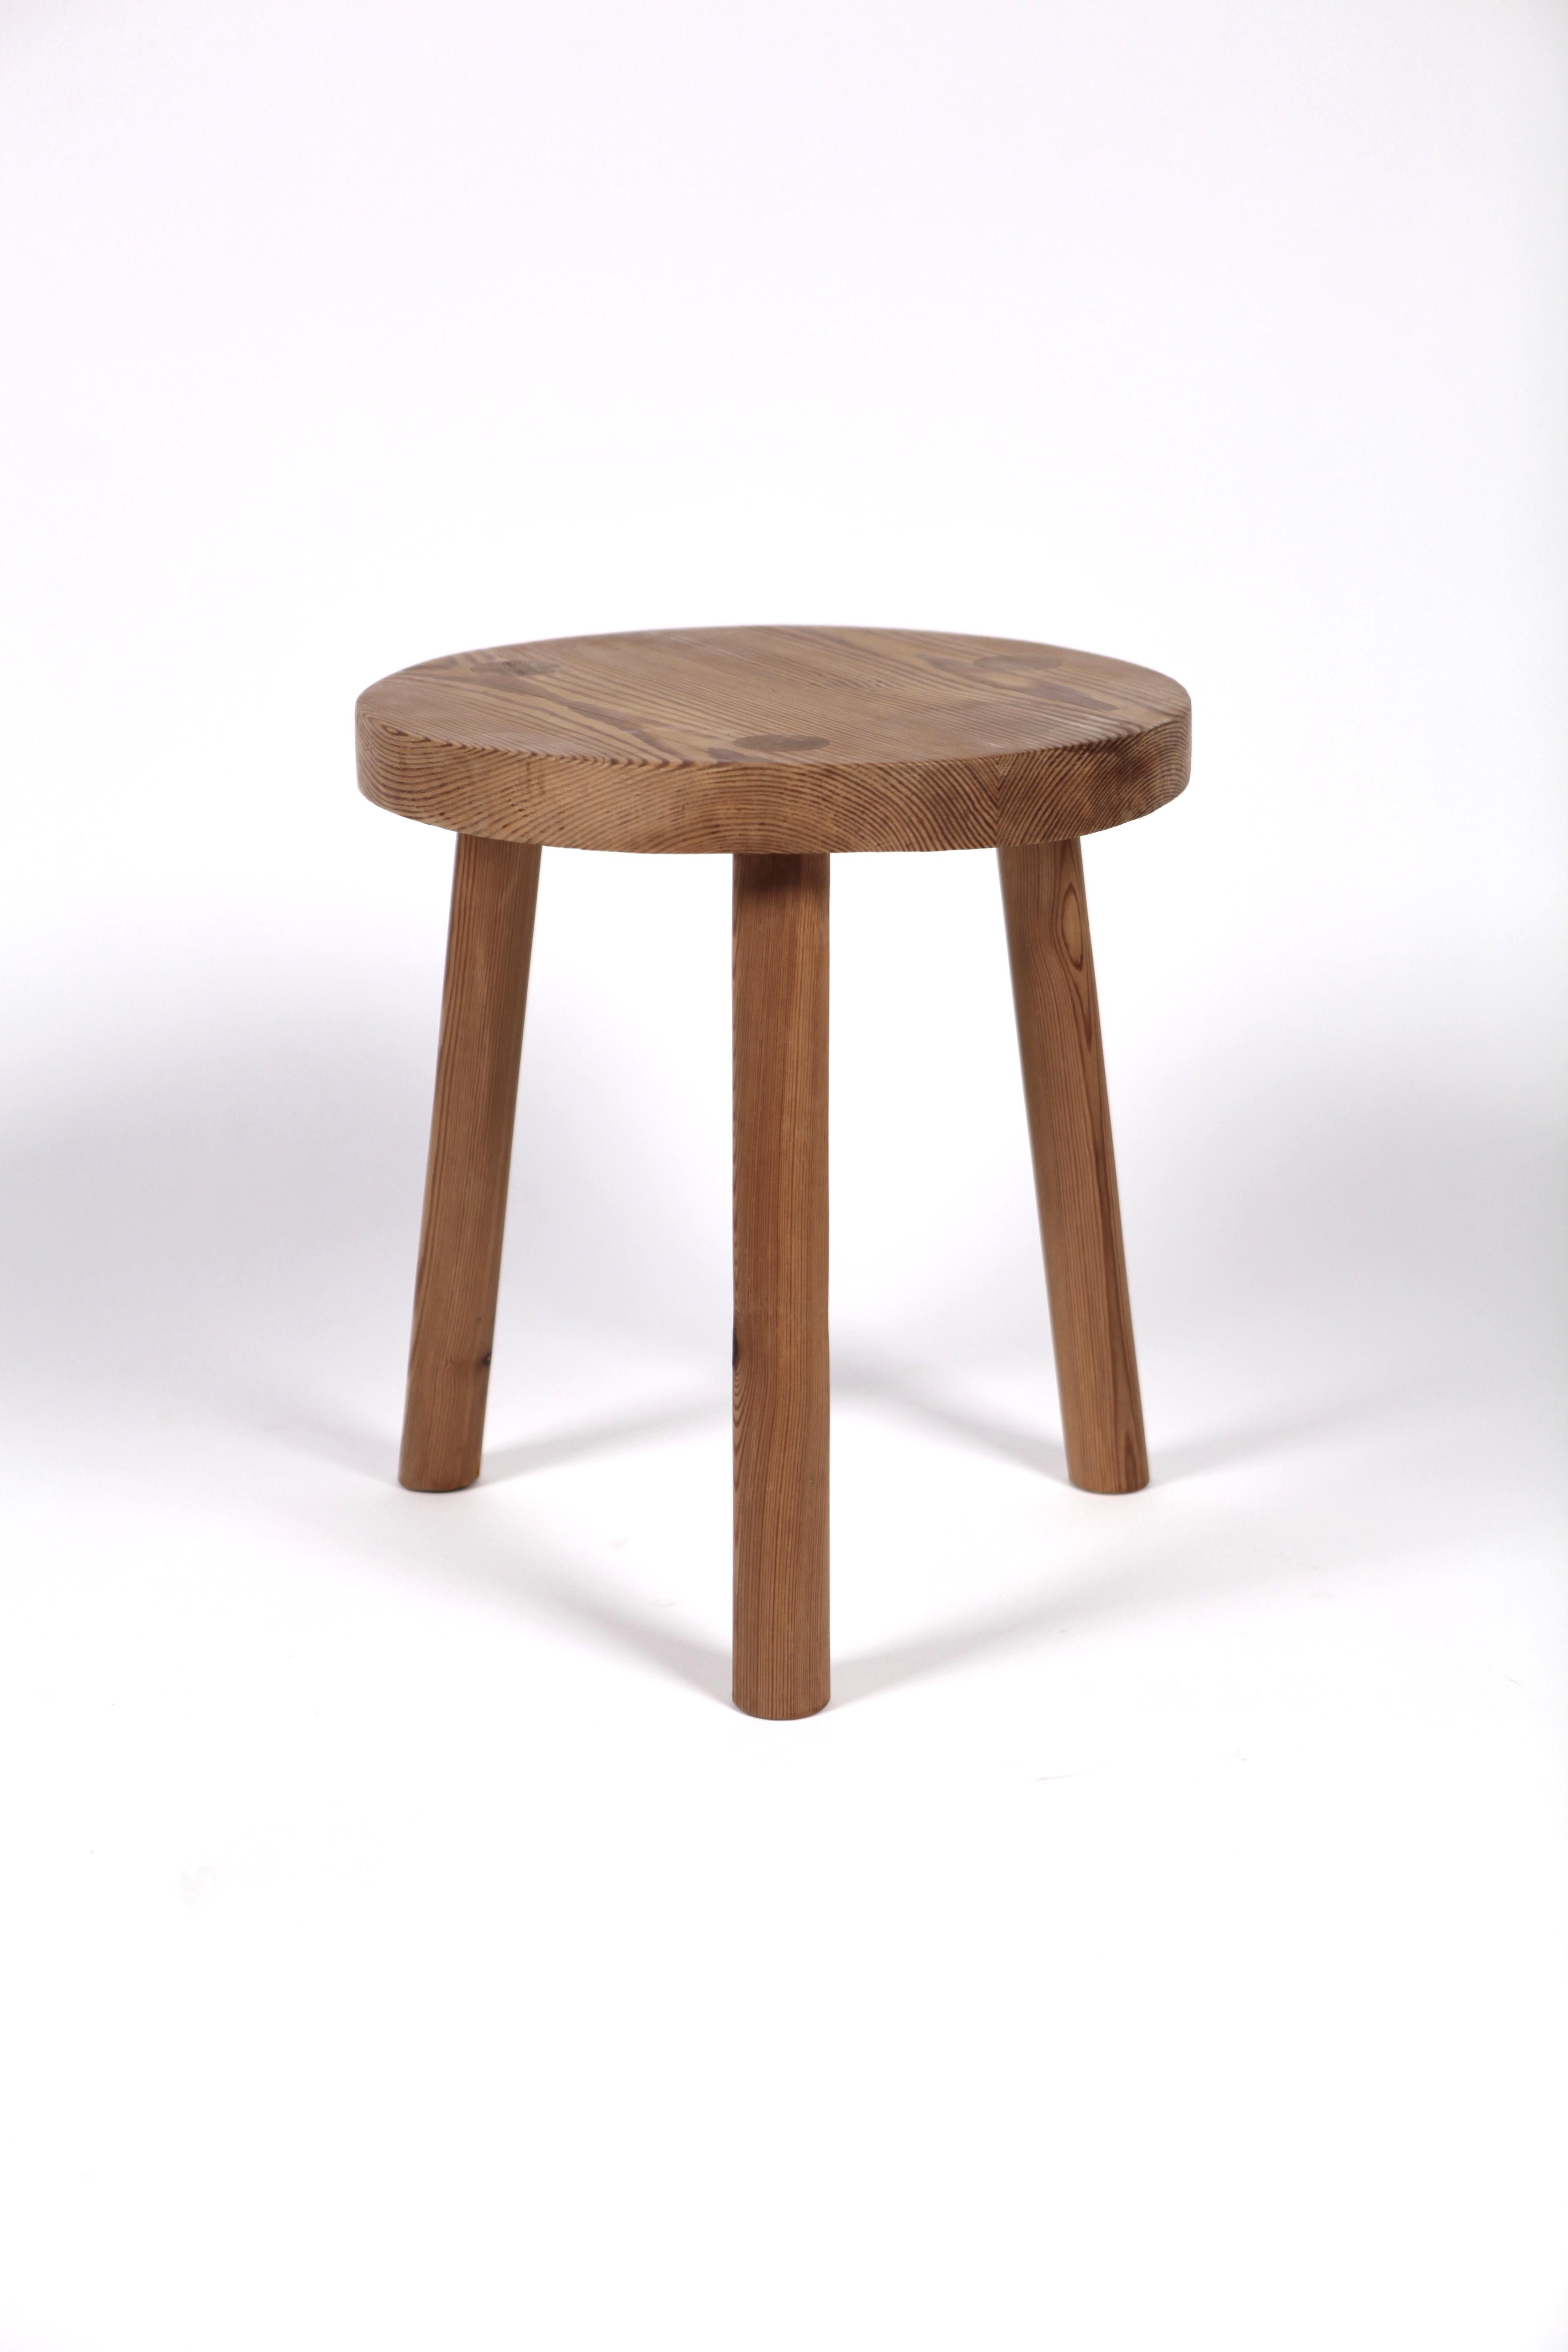 A solid Scandinavian Modern pine stool or small side table, attributed to Axel Einar Hjorth.
The measurements are identical to the Utö stool, the shape of the legs slightly different, maybe a version of the Utö stool.
Executed in 1937 solid